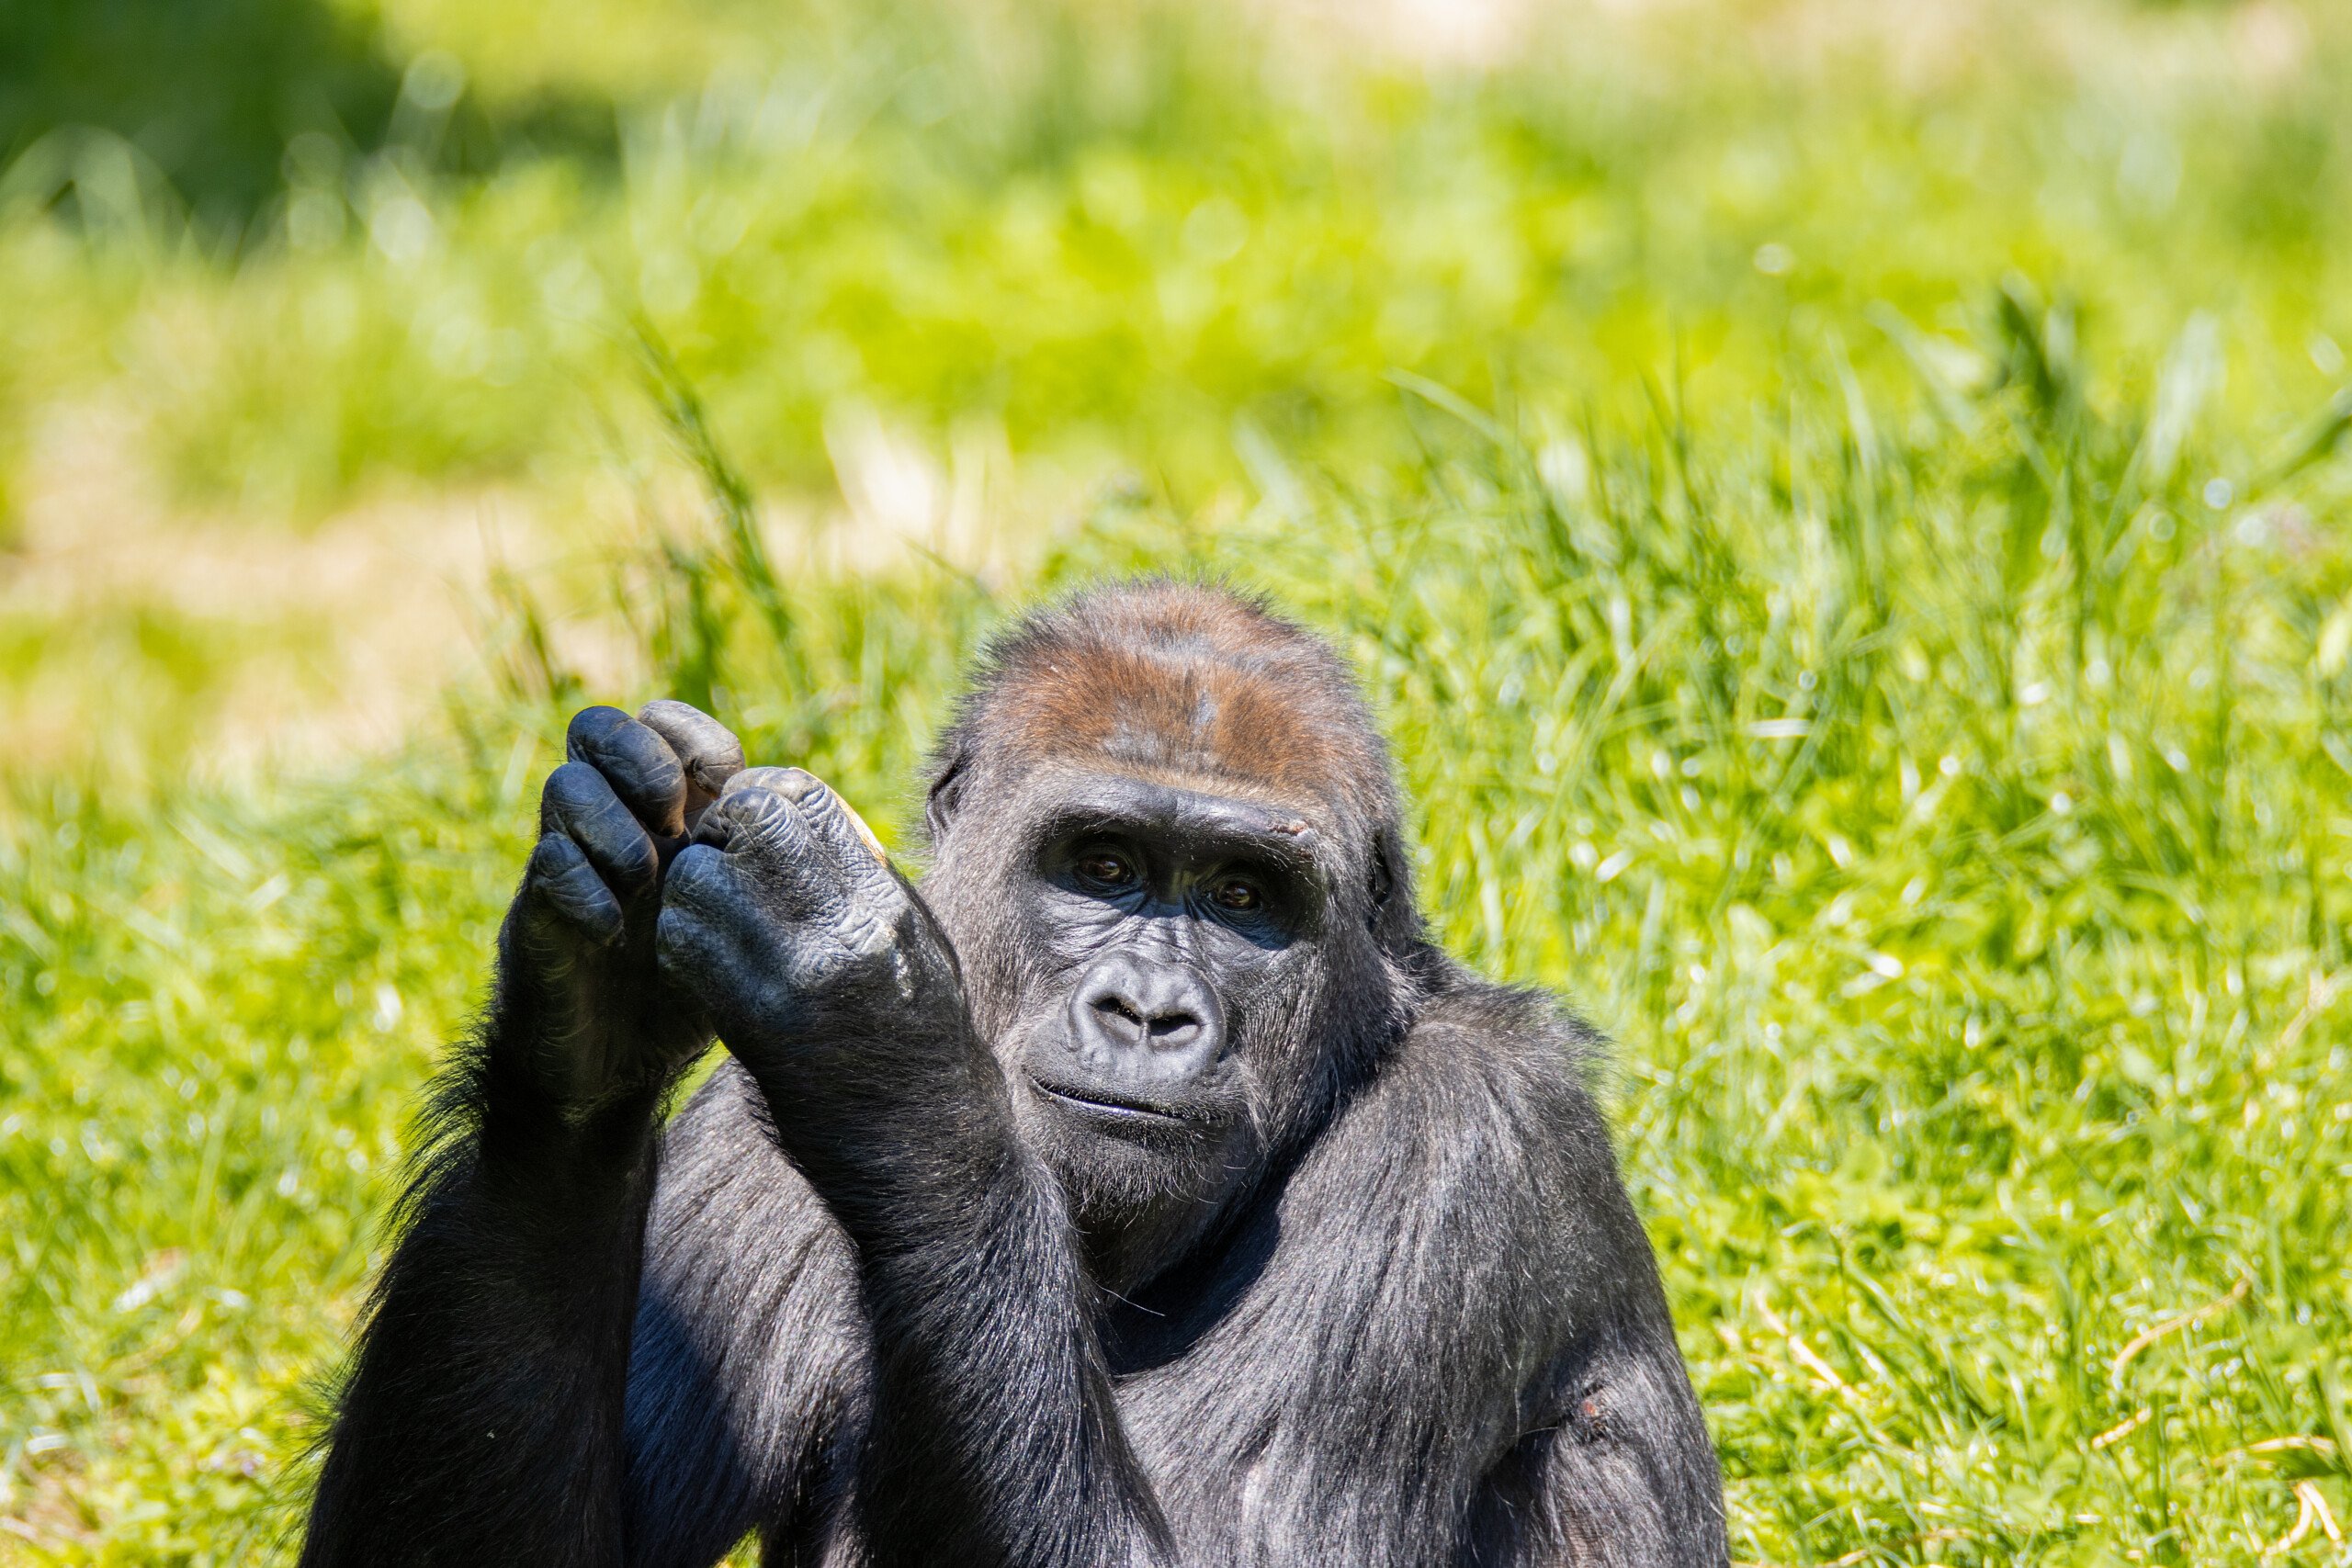 Western lowland gorilla Patty sits in the yard of PECO Primate Reserve at Philadelphia Zoo.